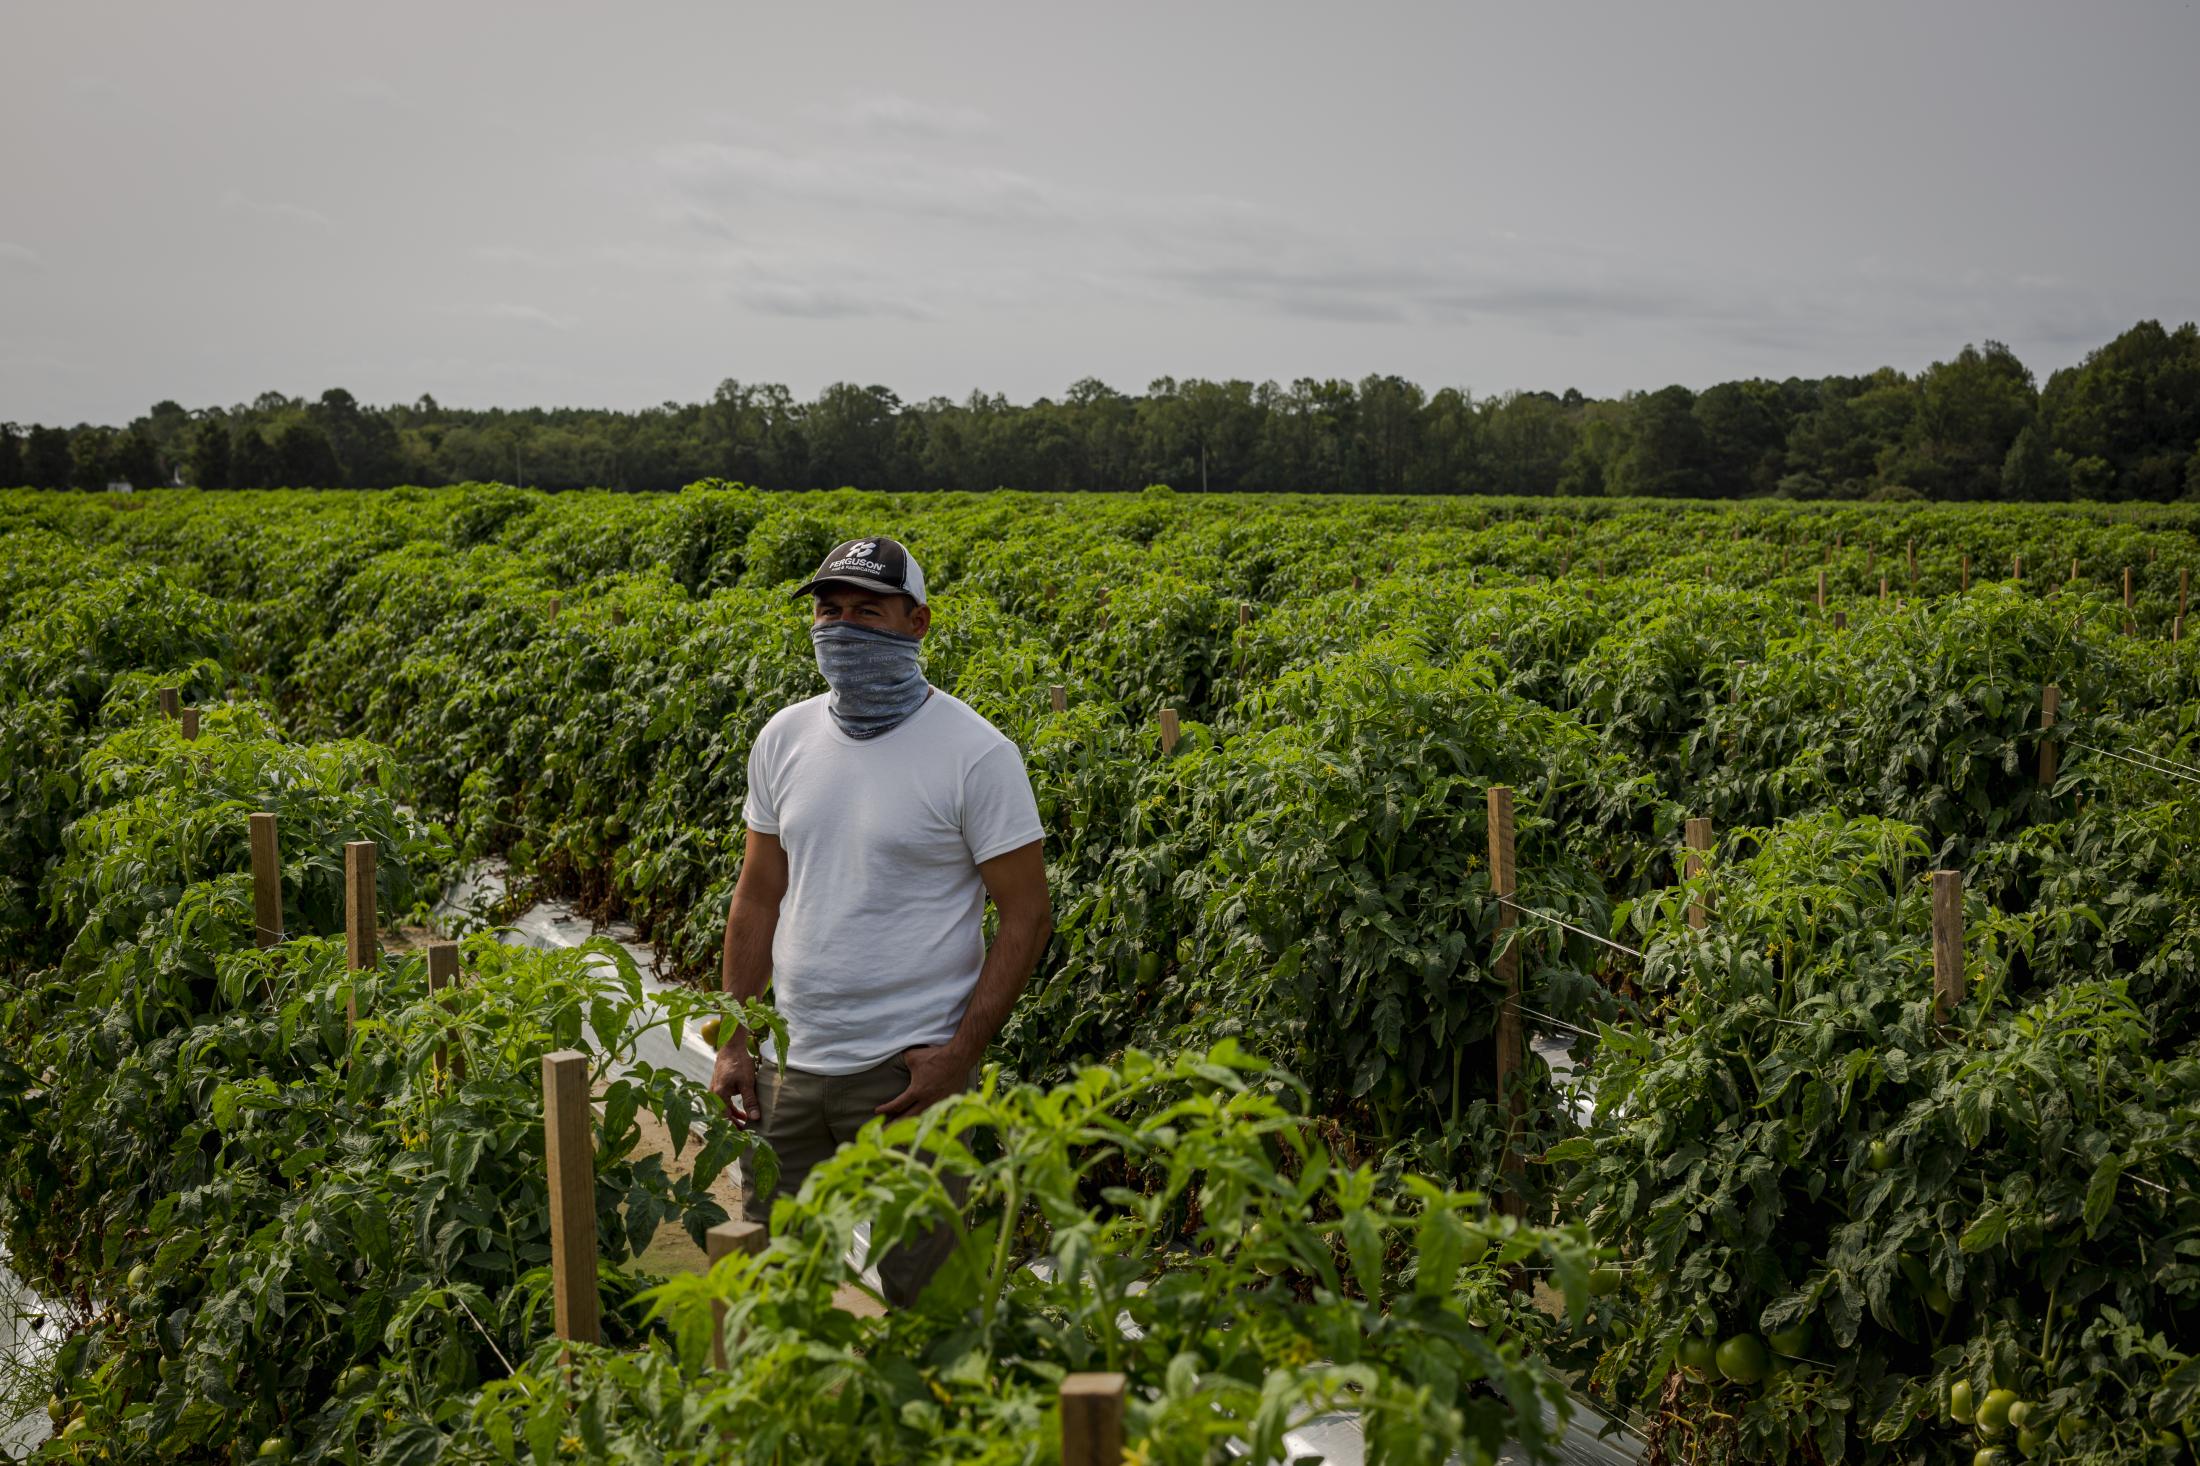 CHERITON, VA &ndash; September 9, 2020: Seasonal farmworker poses for a portrait in one of the many tomato fields in the remote Eastern Shore of Virginia. Seasonal farmworkers are brought by the thousands to toil in the tomato fields, since the start of the covid-19 pandemic, their conditions have worsened. Photo: Carlos Bernate for The New York Times